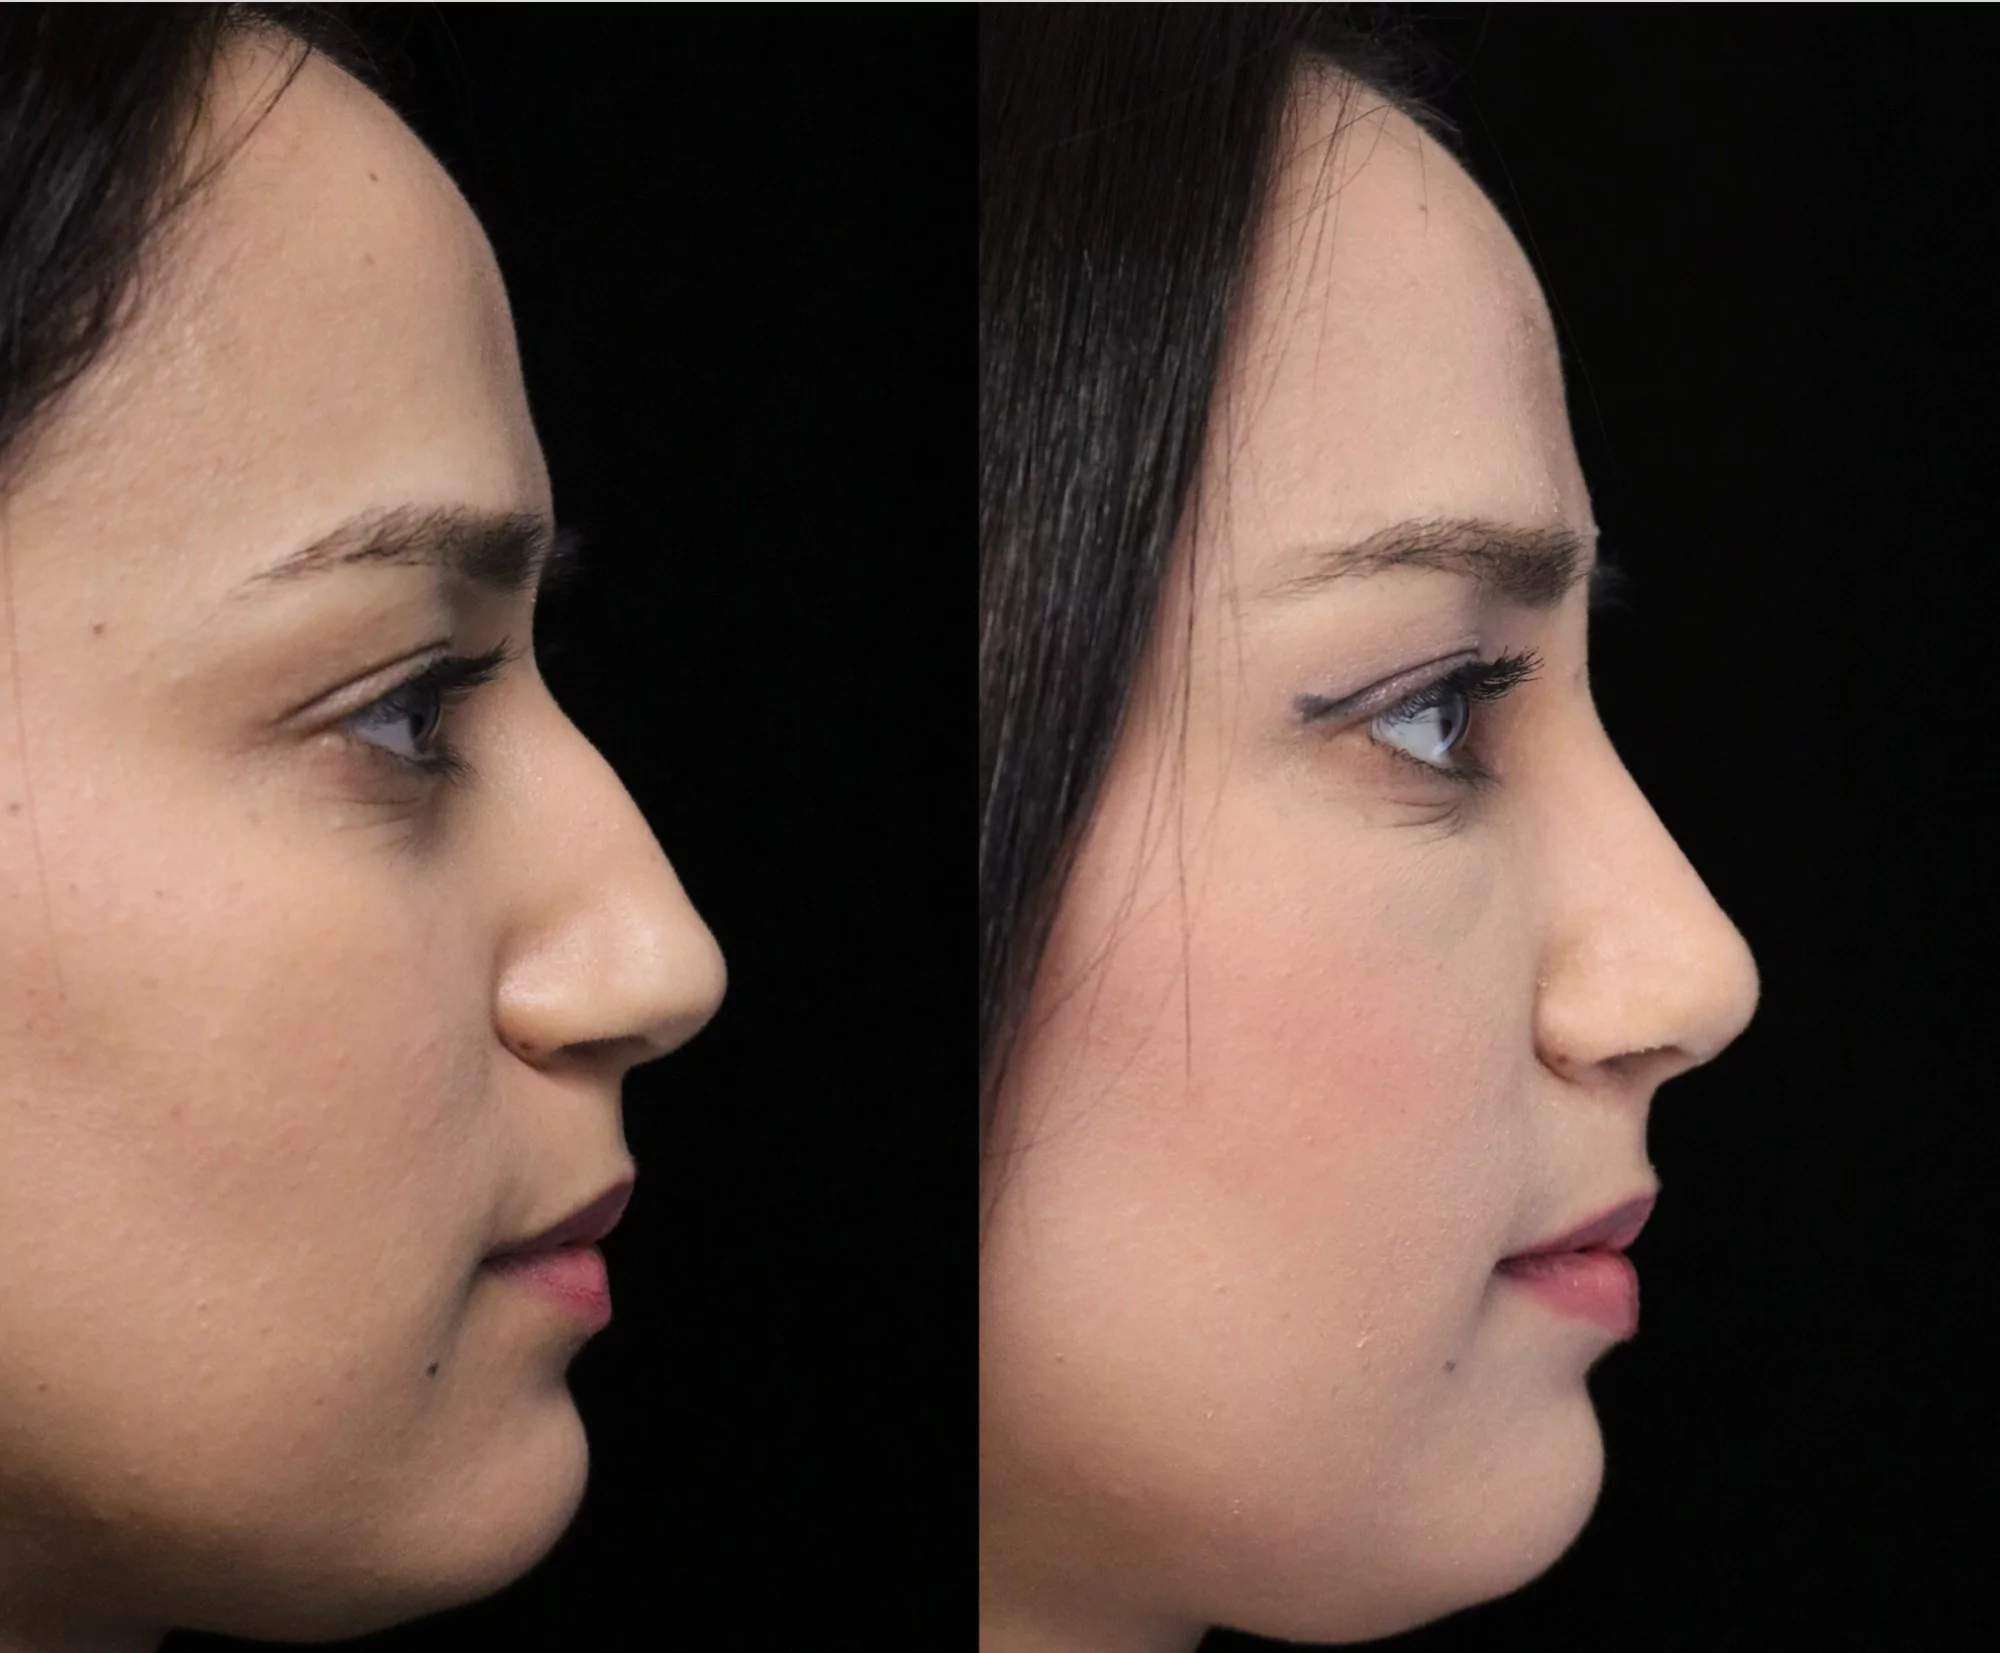 closed rhinoplasty before and after illustration of a woman with small dorsal hump